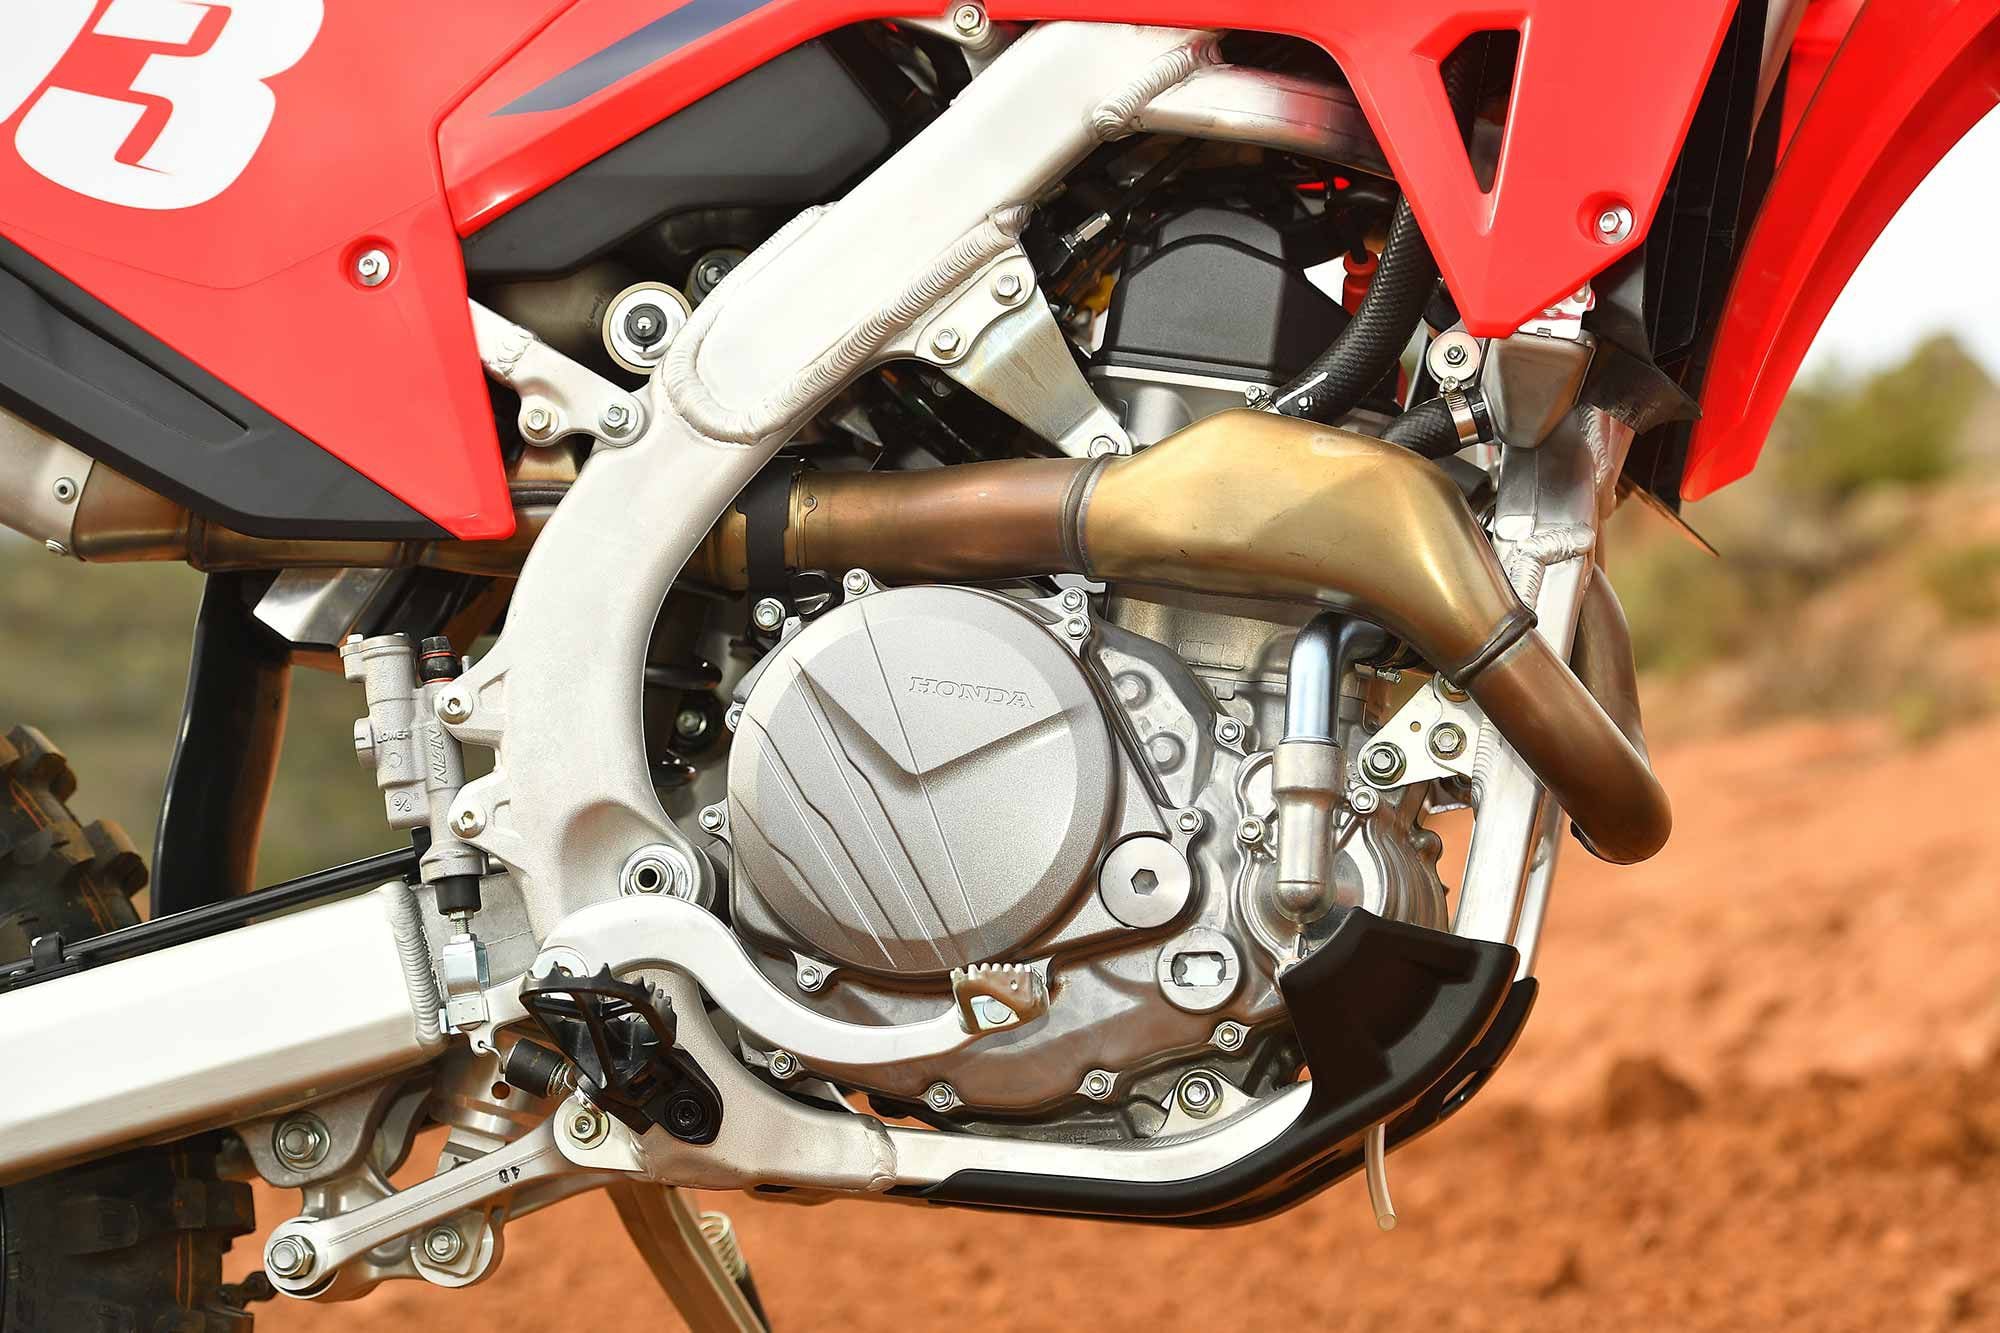 Most Honda dirt bike clutch covers don’t look this clean for long. Also, the externally visible engine oil sight glass is a marked improvement over dipstick designs of old.